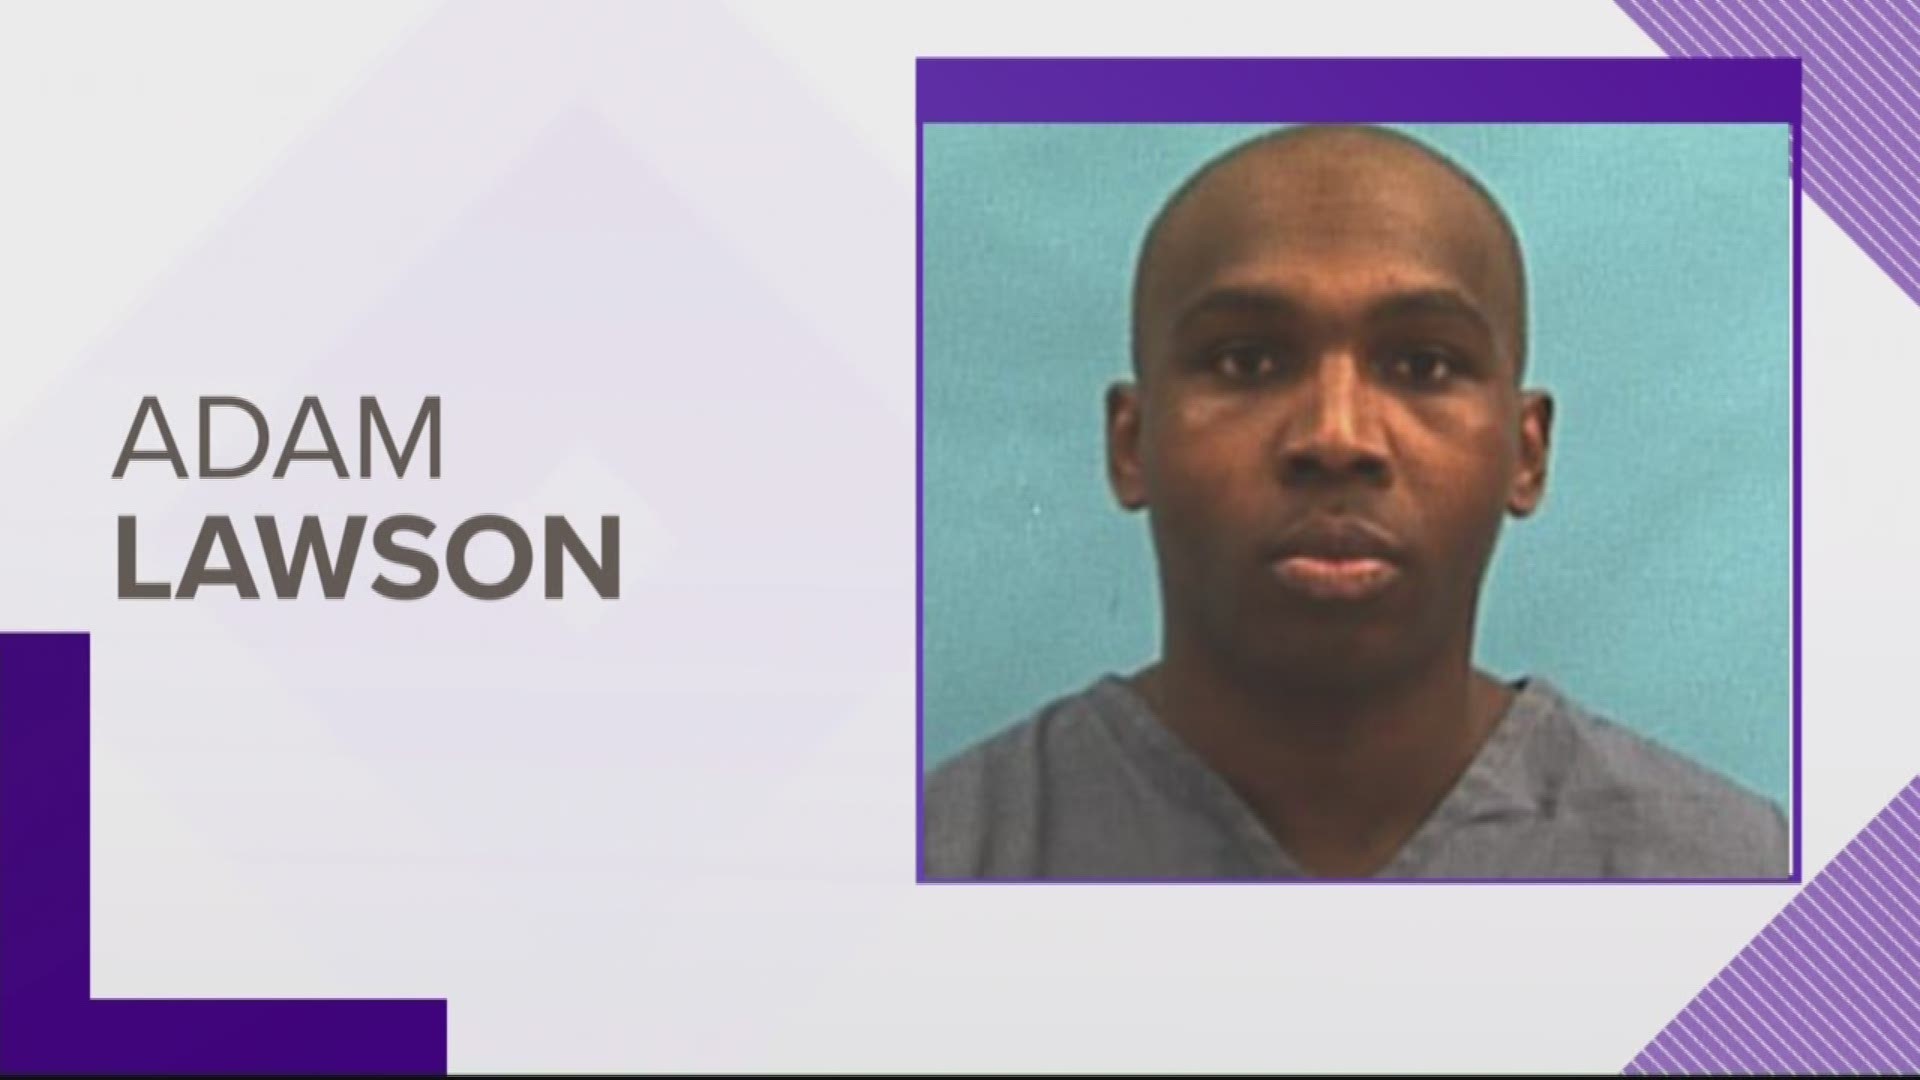 The man who pled guilty to beating a local music teacher to death with a golf club is now in state custody Wednesday, according to the Florida Department of Corrections website.